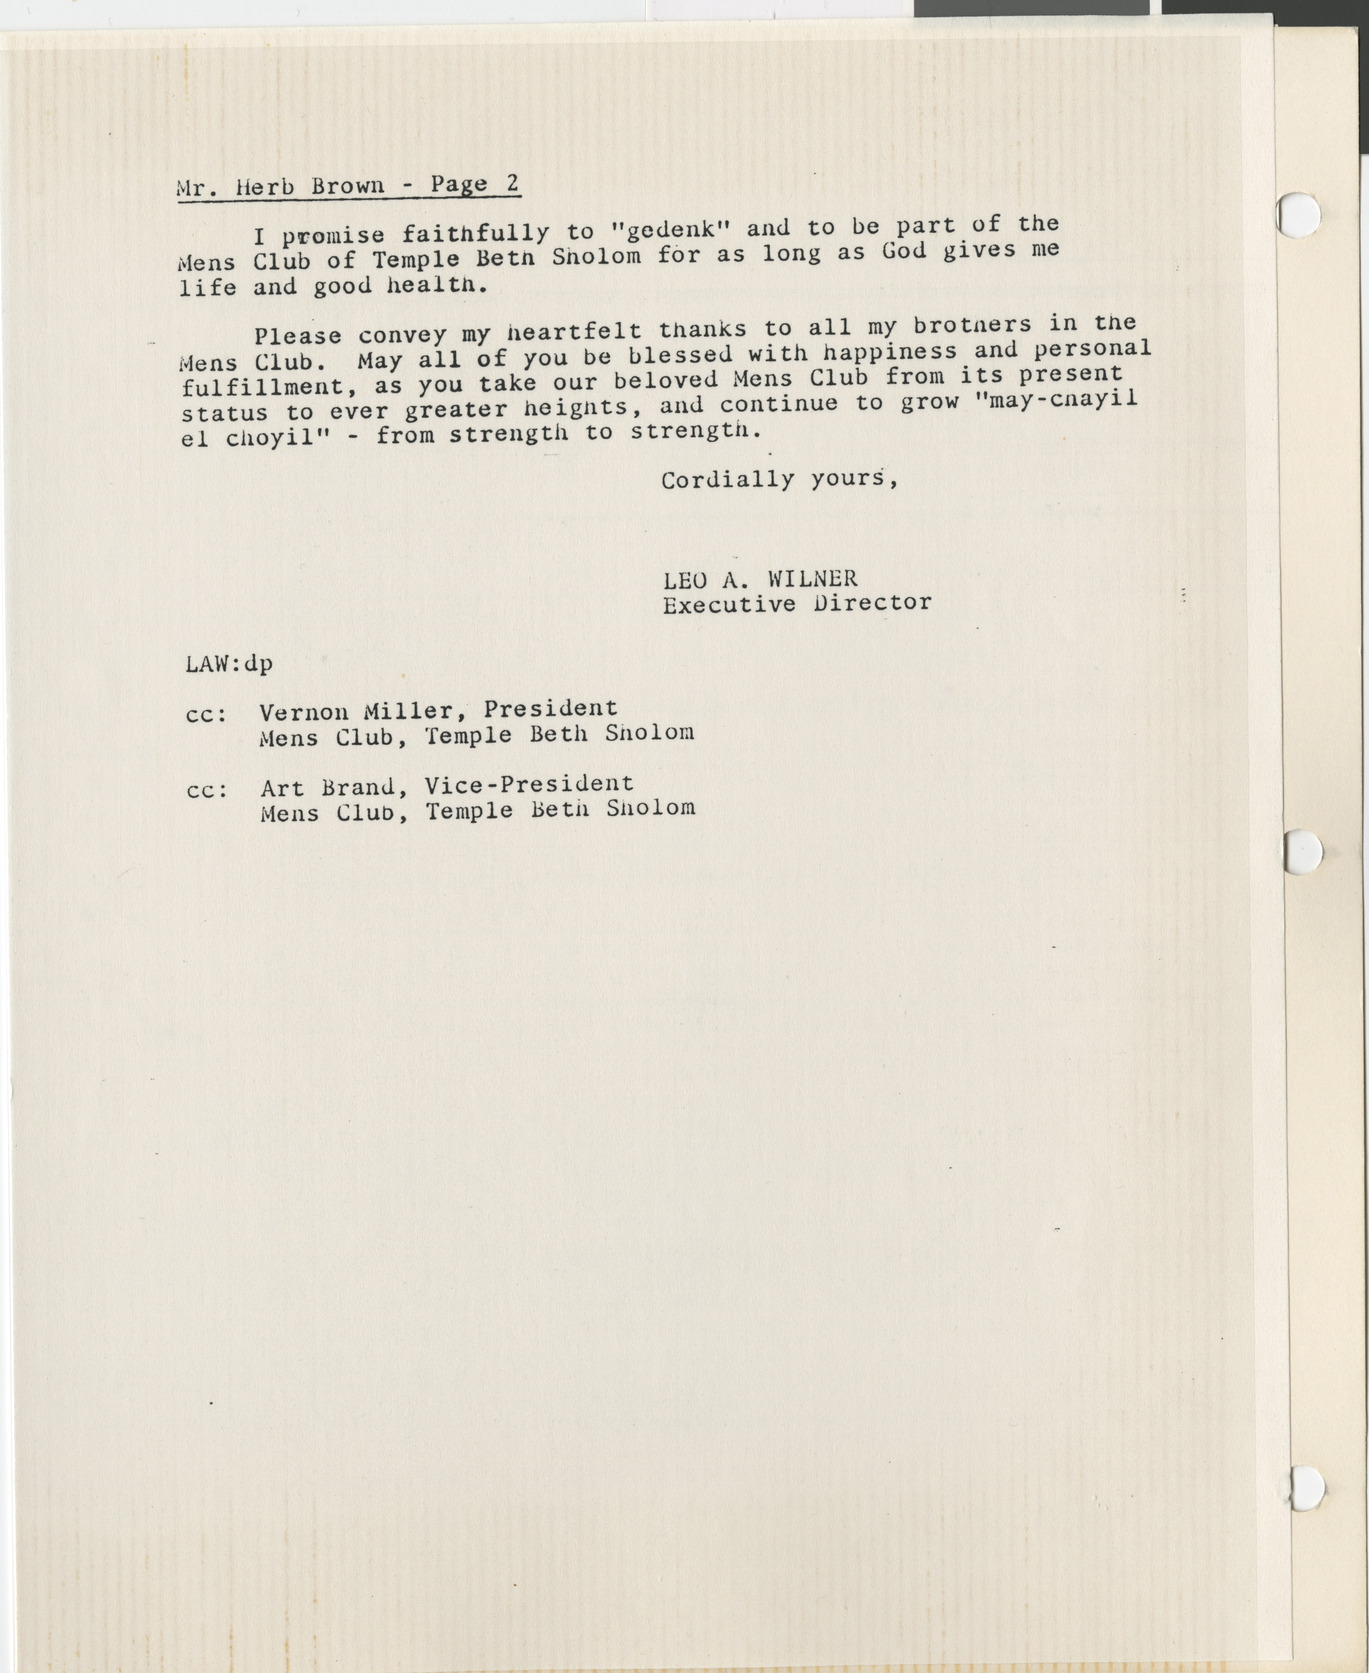 Letter from Leo Wilner to Herb Brown, March 12, 1984, page 2